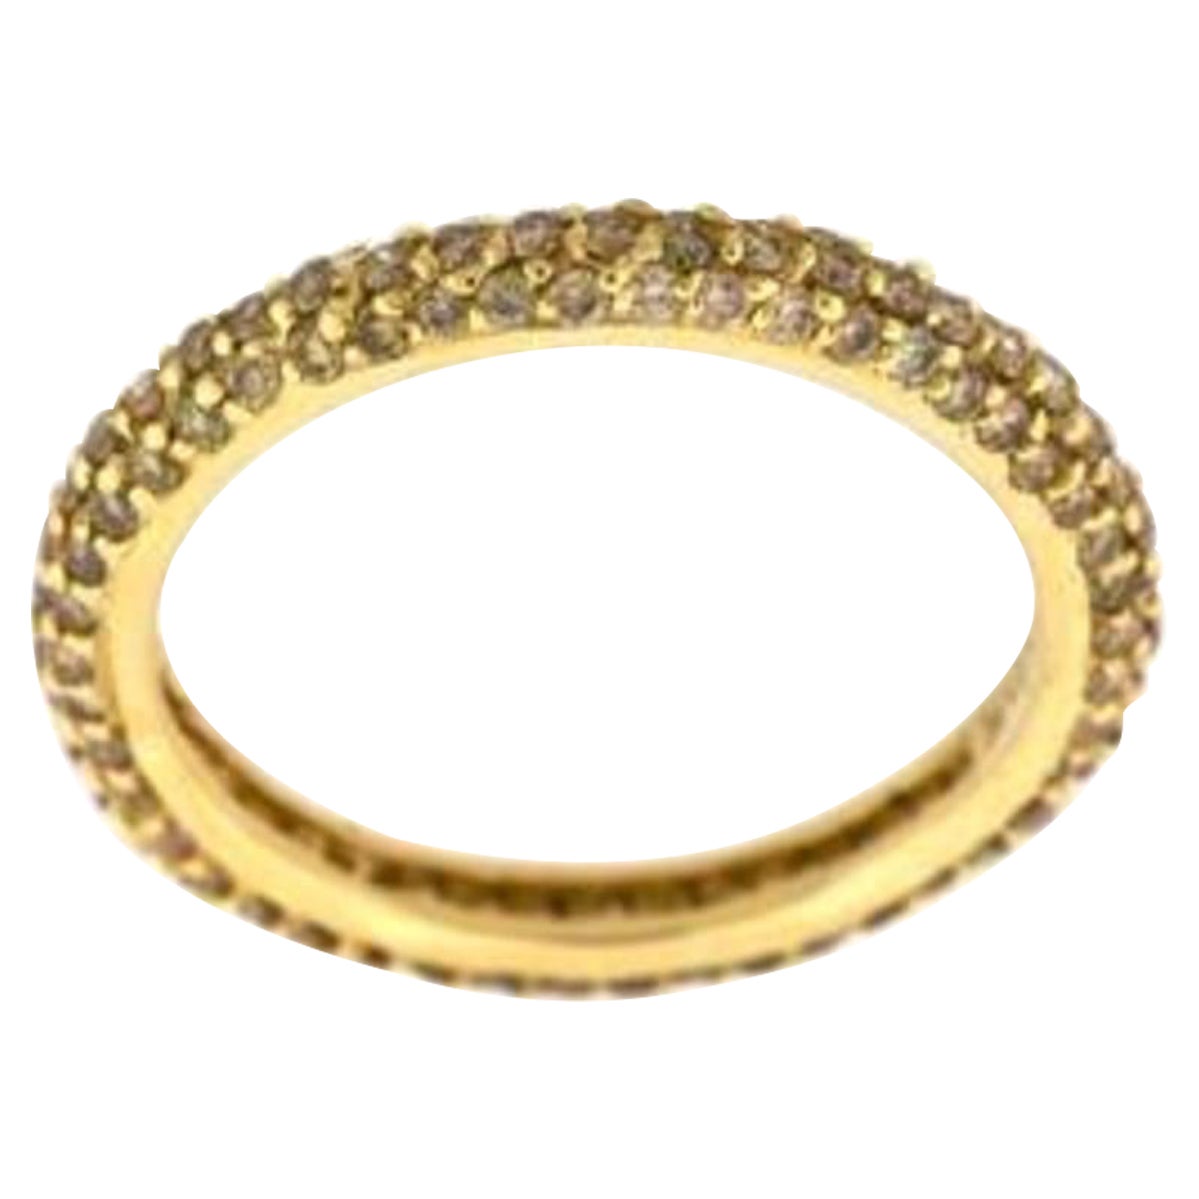 Le Vian Ring Featuring 1 Cts. Vanilla Diamonds Set in 14k Vanilla Gold For Sale